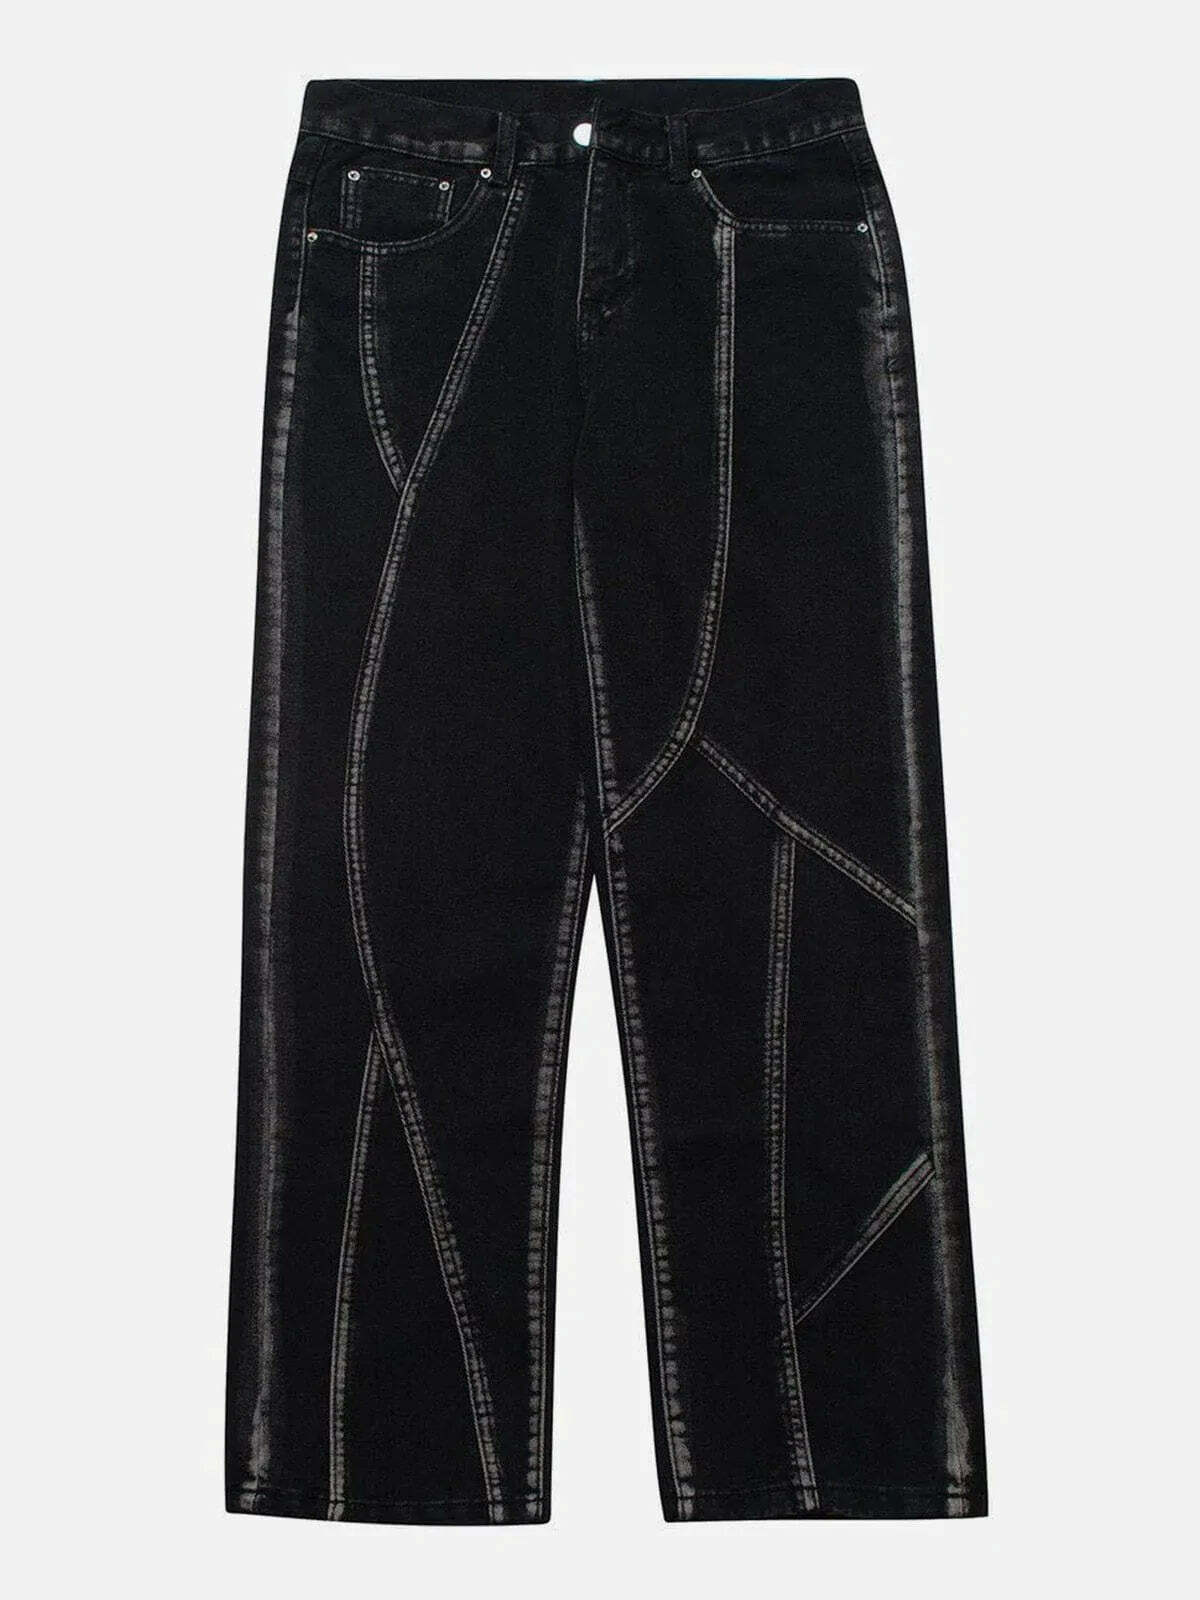 hand painted panel pants edgy & artistic streetwear 5801